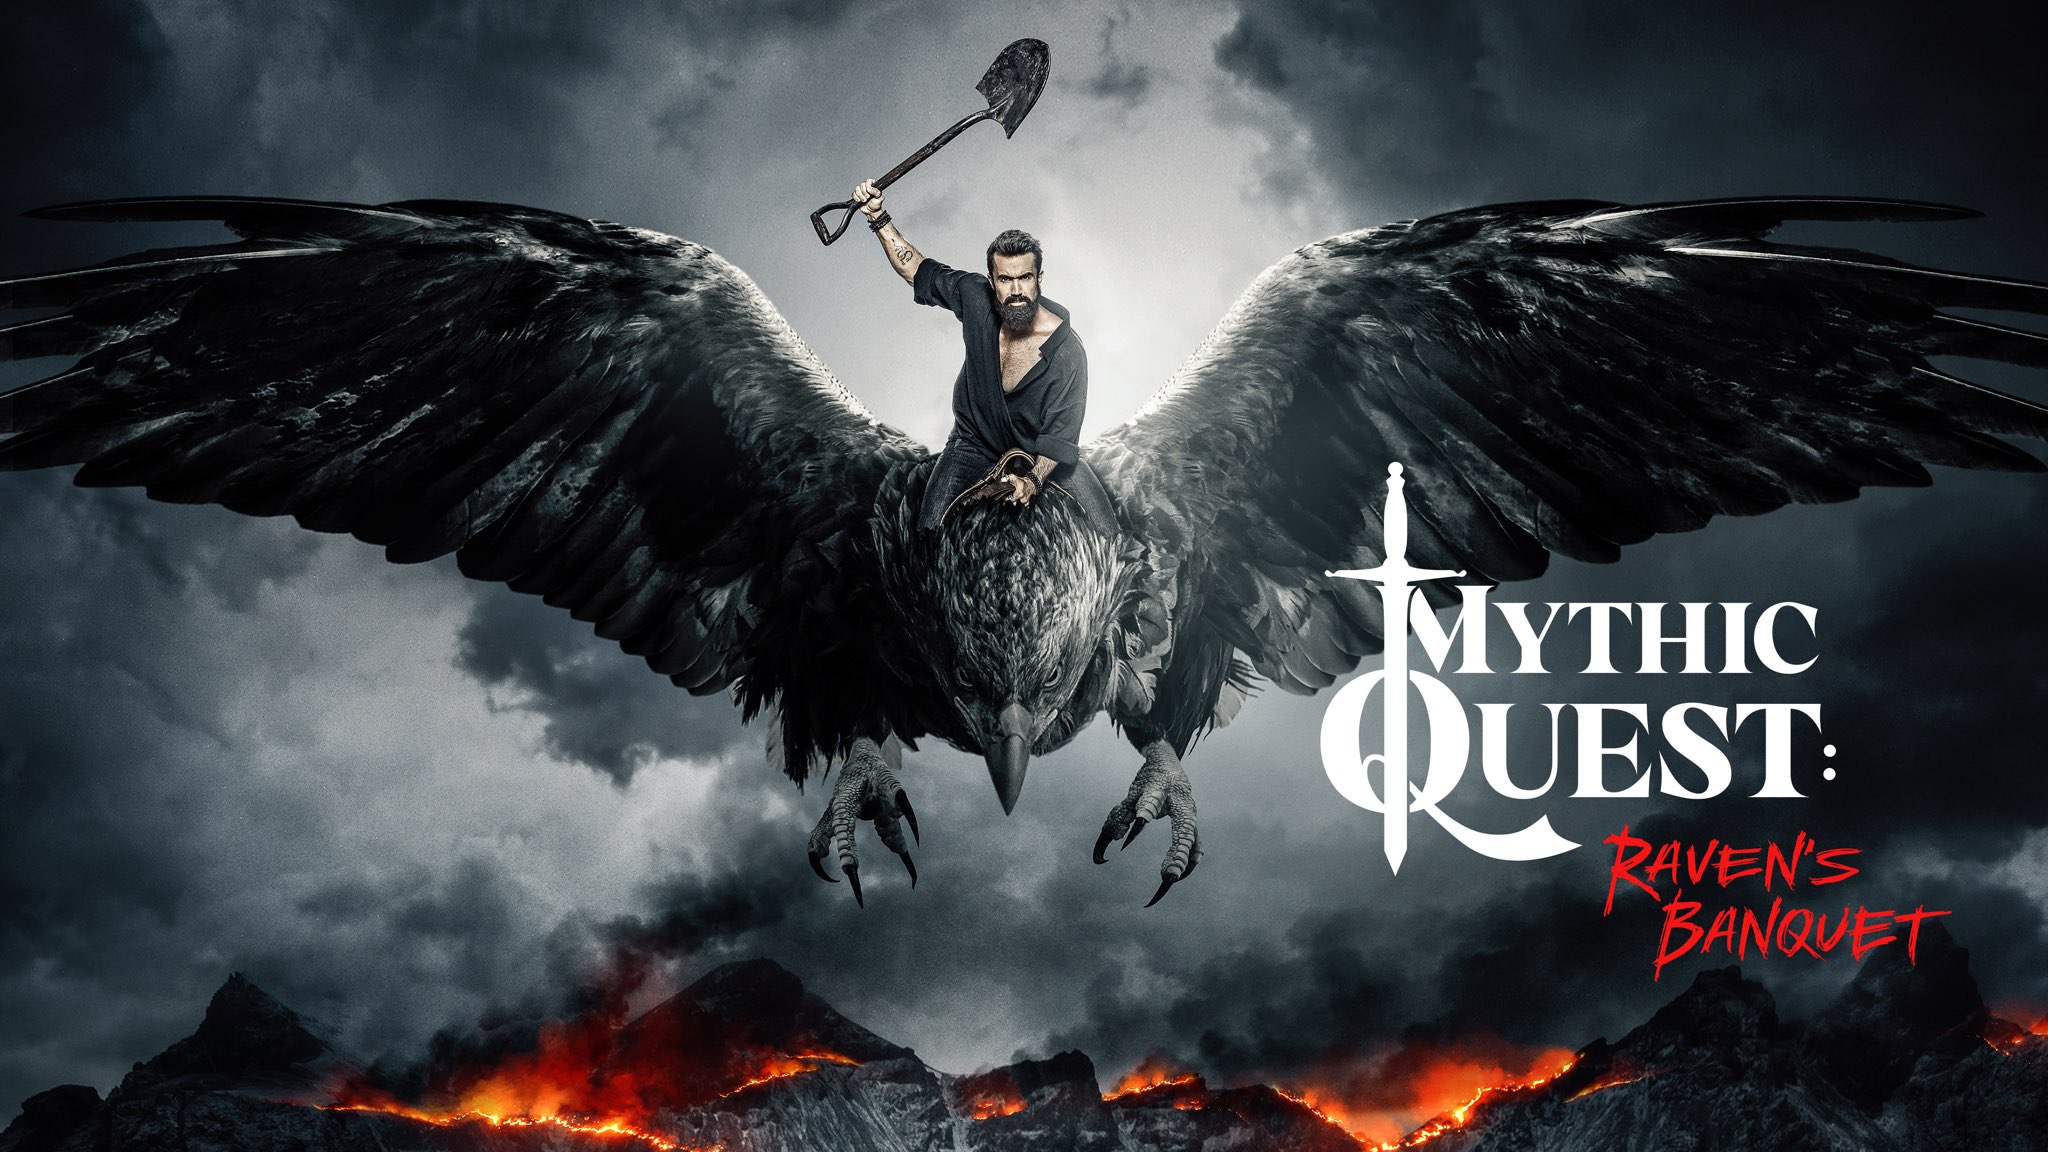 Season 1 of Apple TV+ comedy "Mythic Quest: Raven's Banquet" launches for  binge-watching